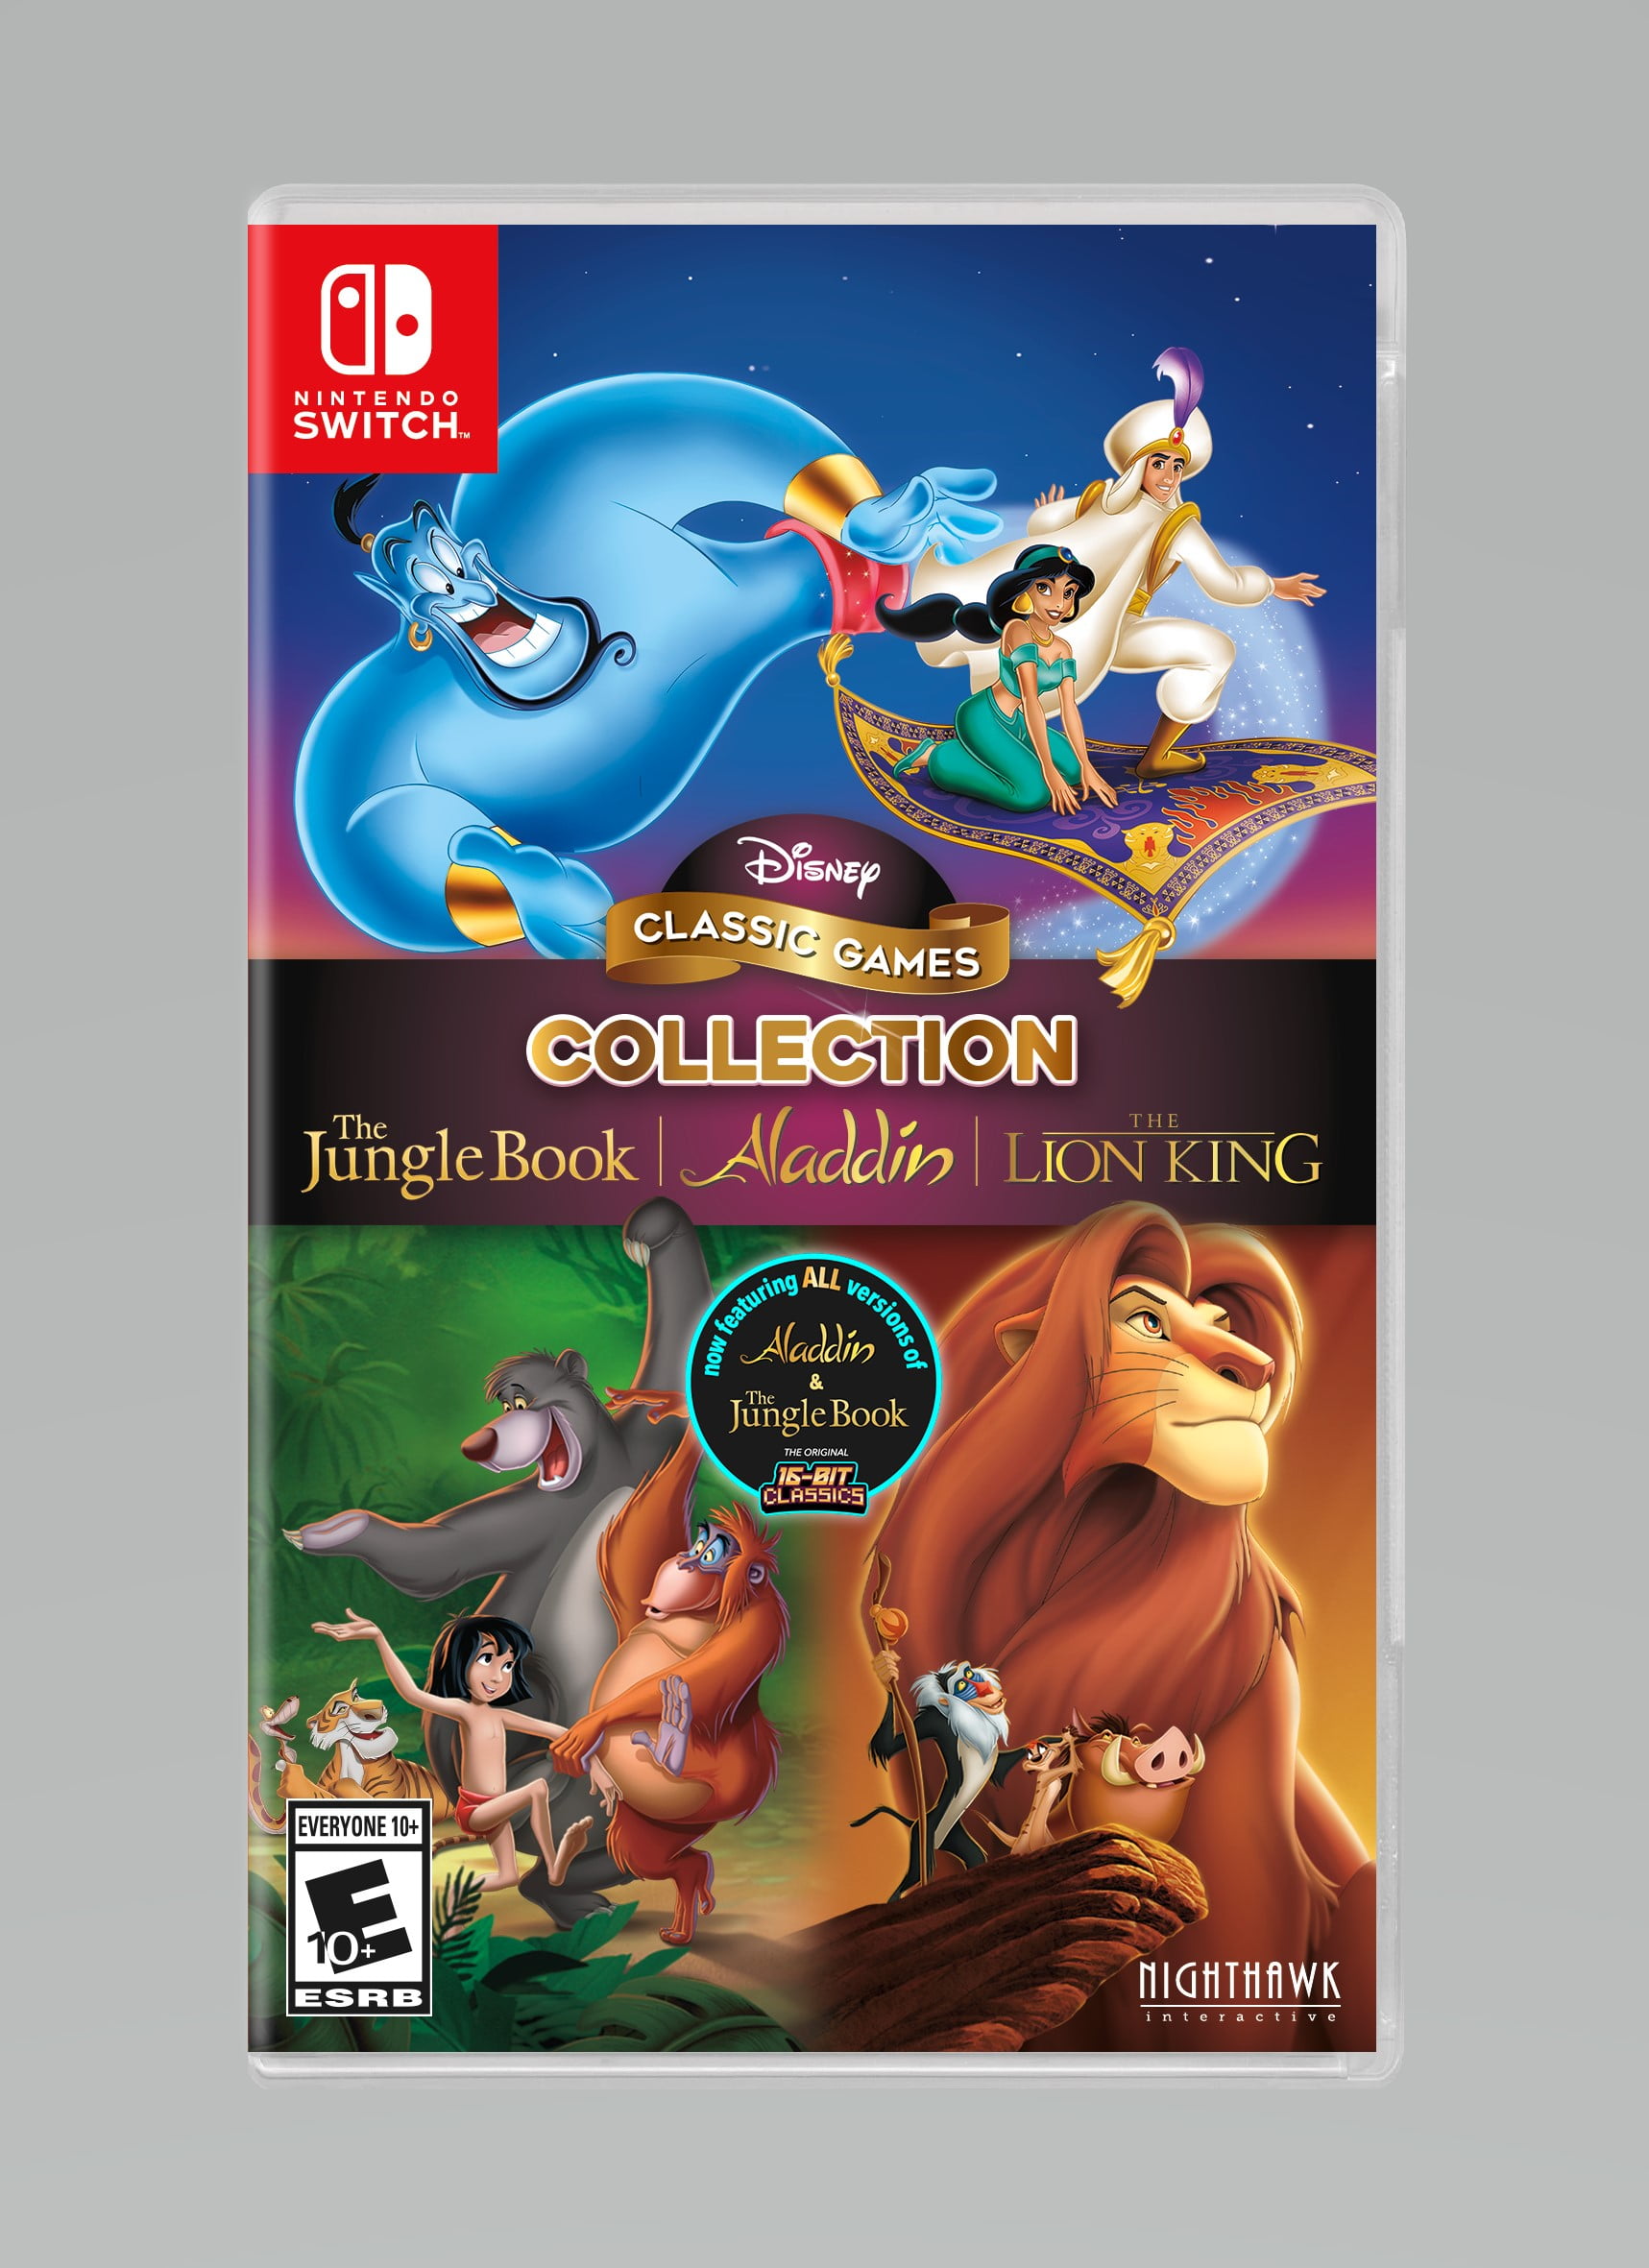 Disney Classic Games Collection Nintendo Switch - Best Buy